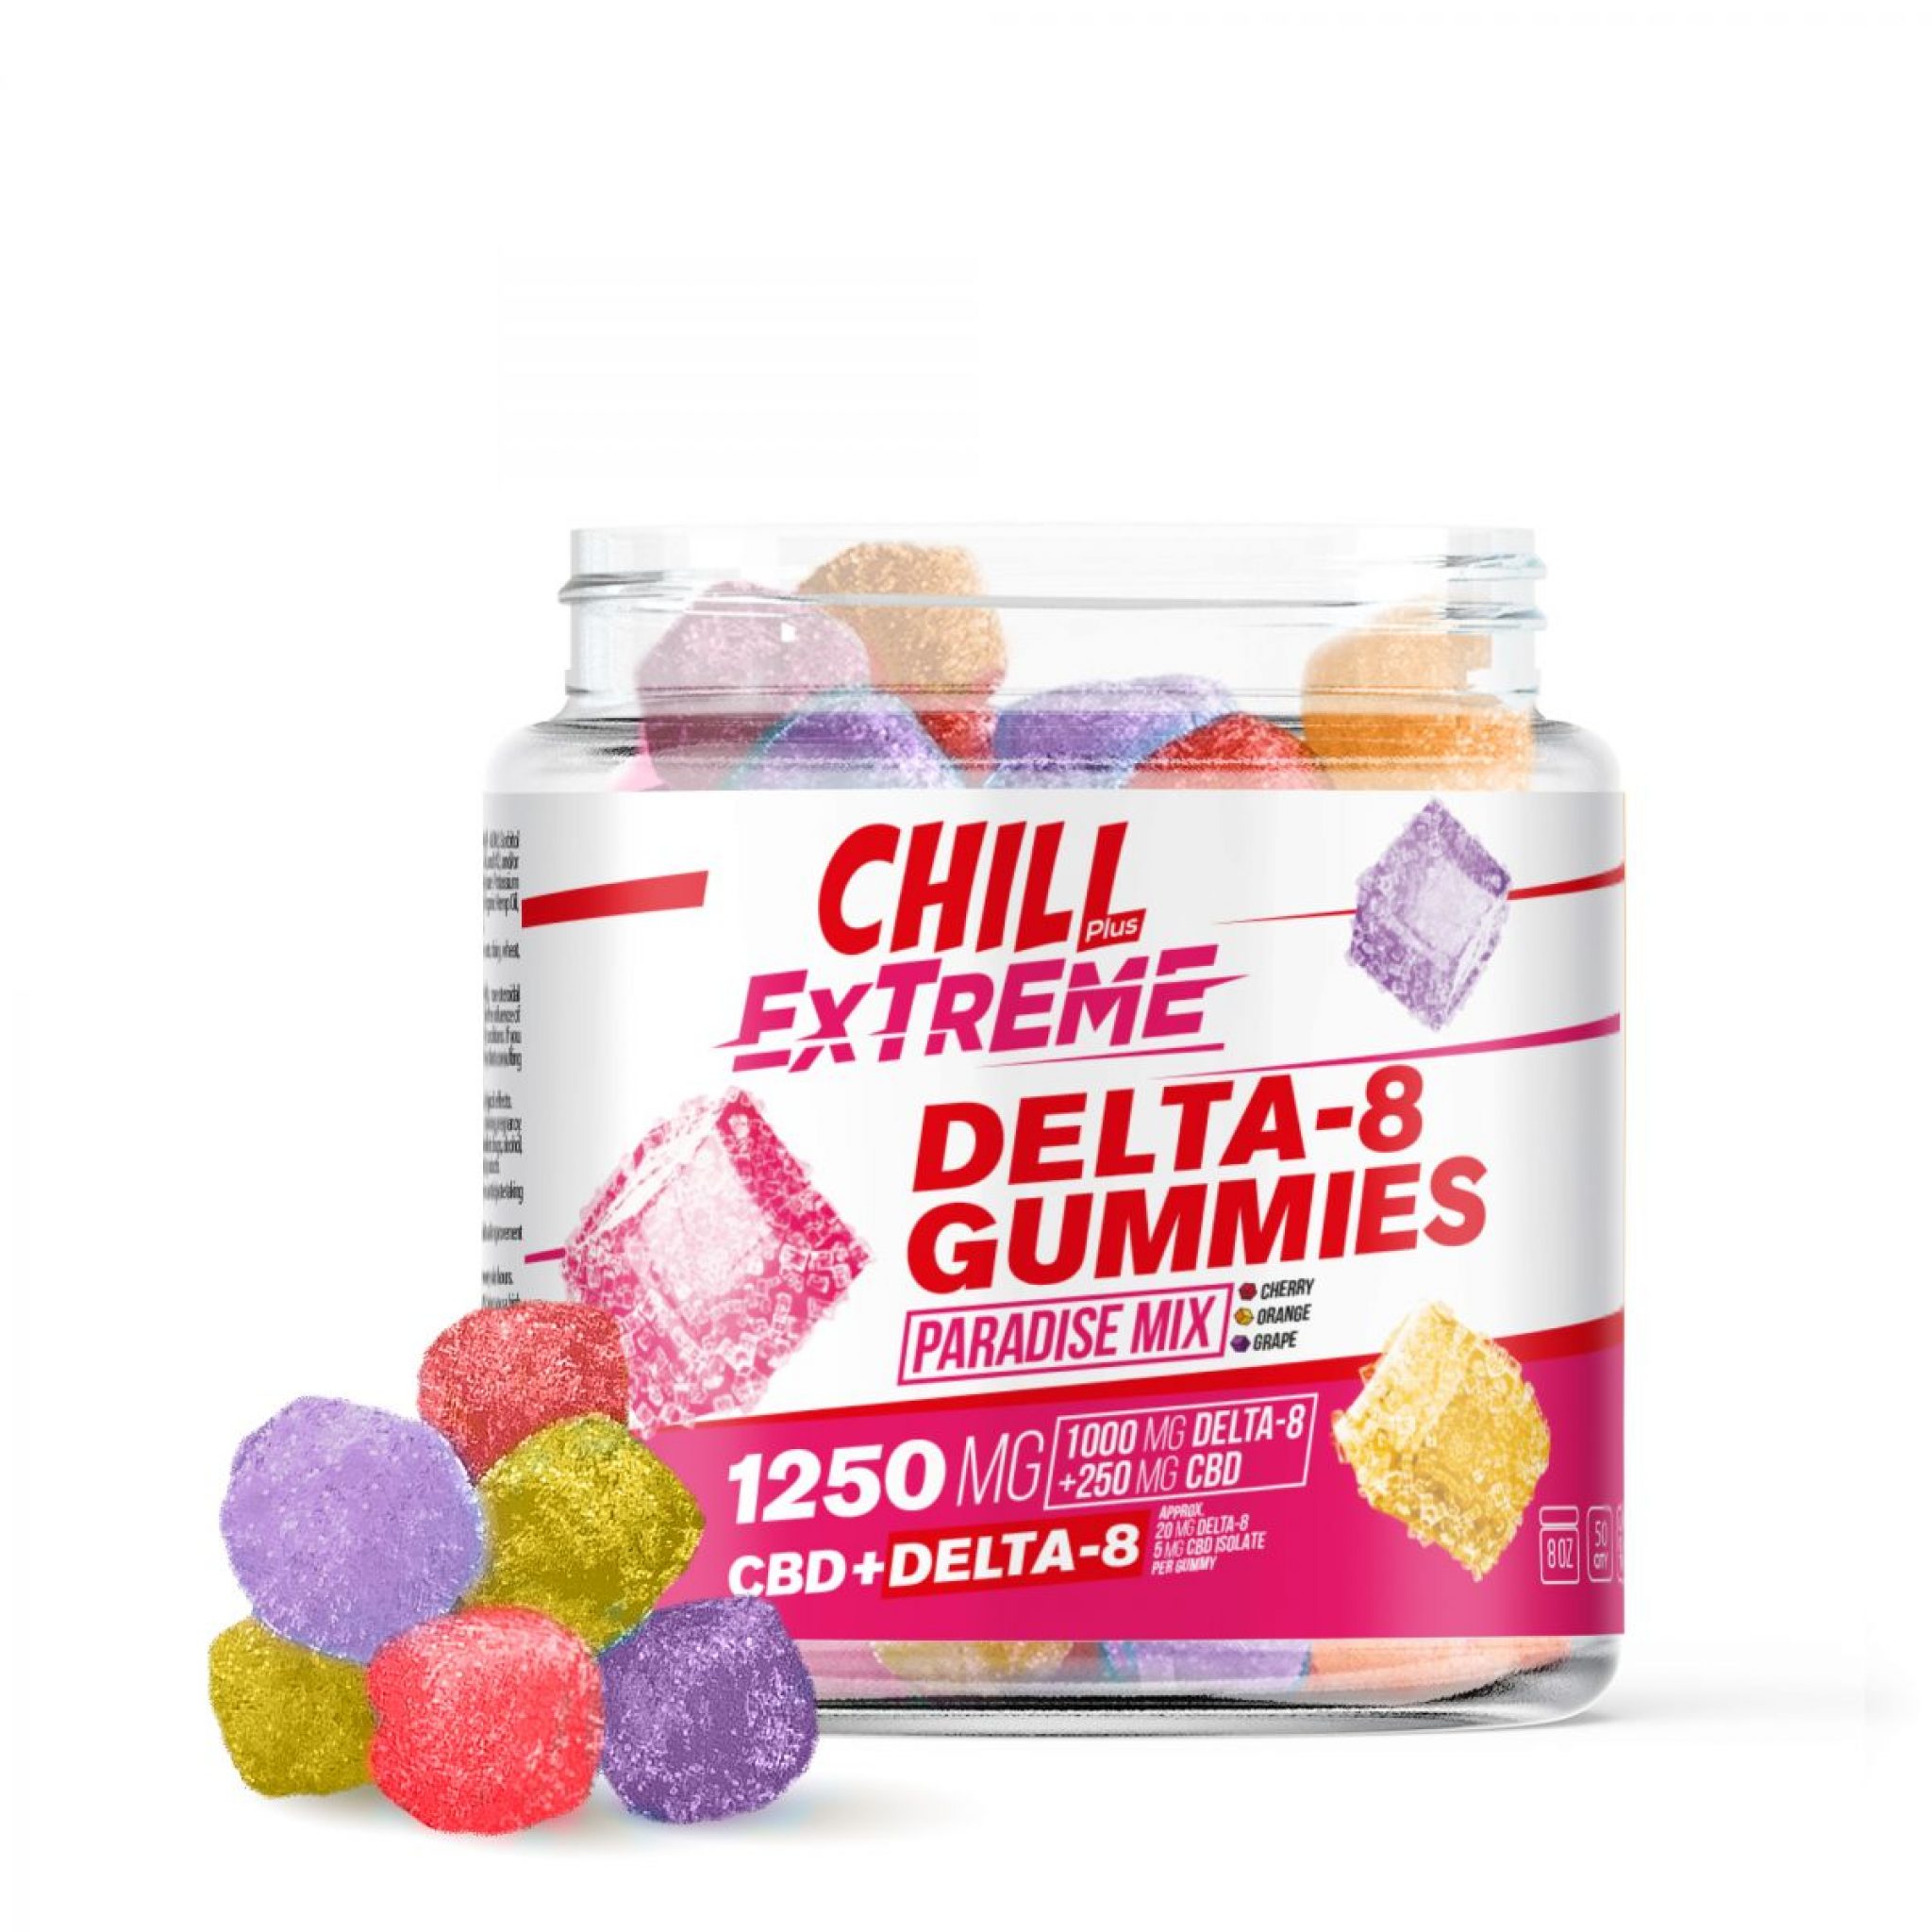 Are Delta 8 Gummies Safe For Your Health?